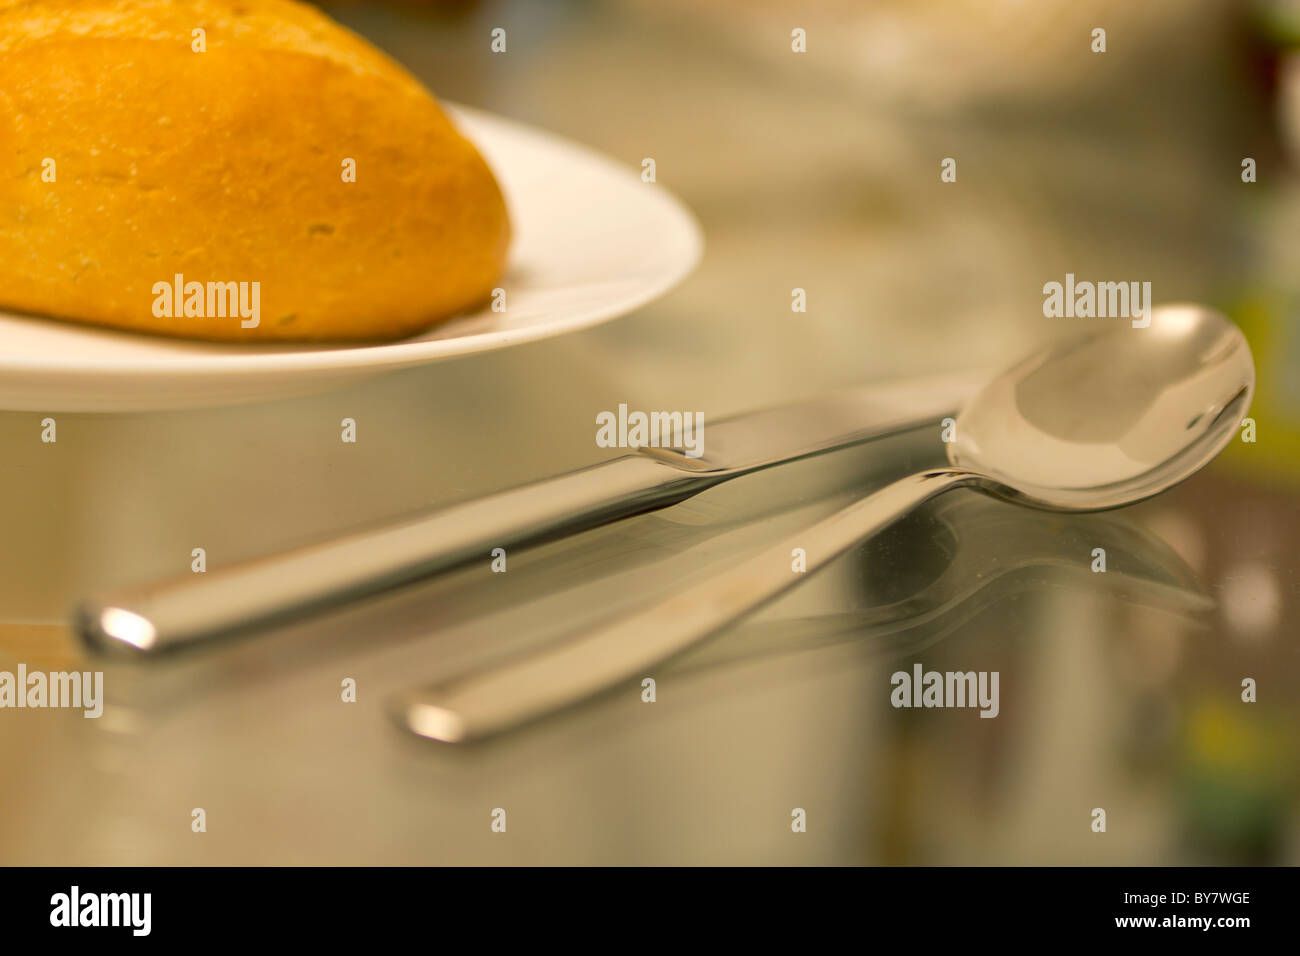 Breakfast: Bread, knive and spoon lying on the kitchen table (glass) Stock Photo